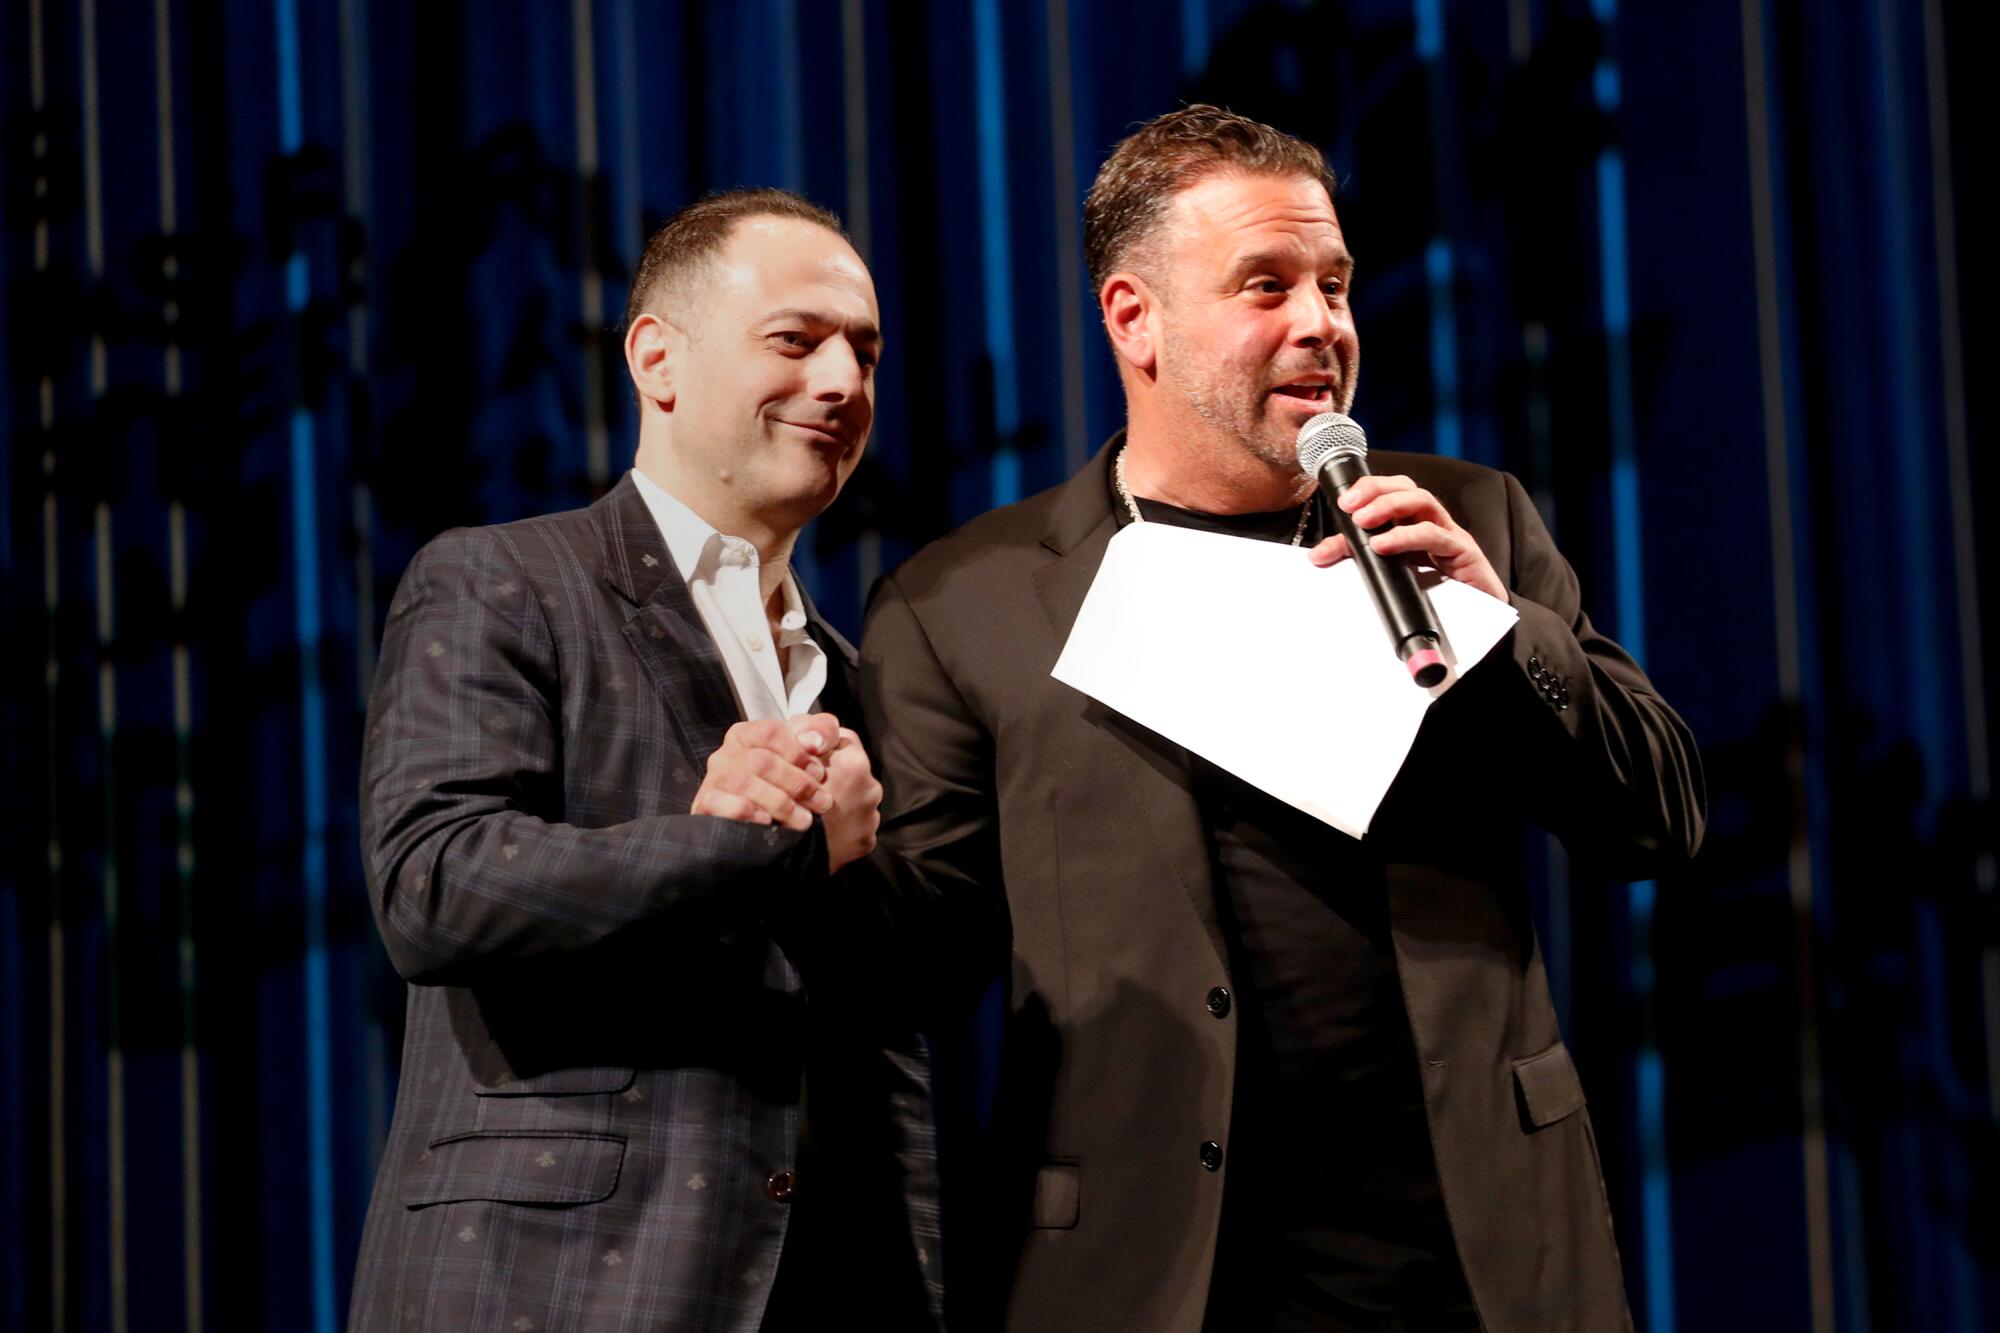 Joel Cohen and Randall Emmett clasp hands onstage as Emmett speaks into a microphone